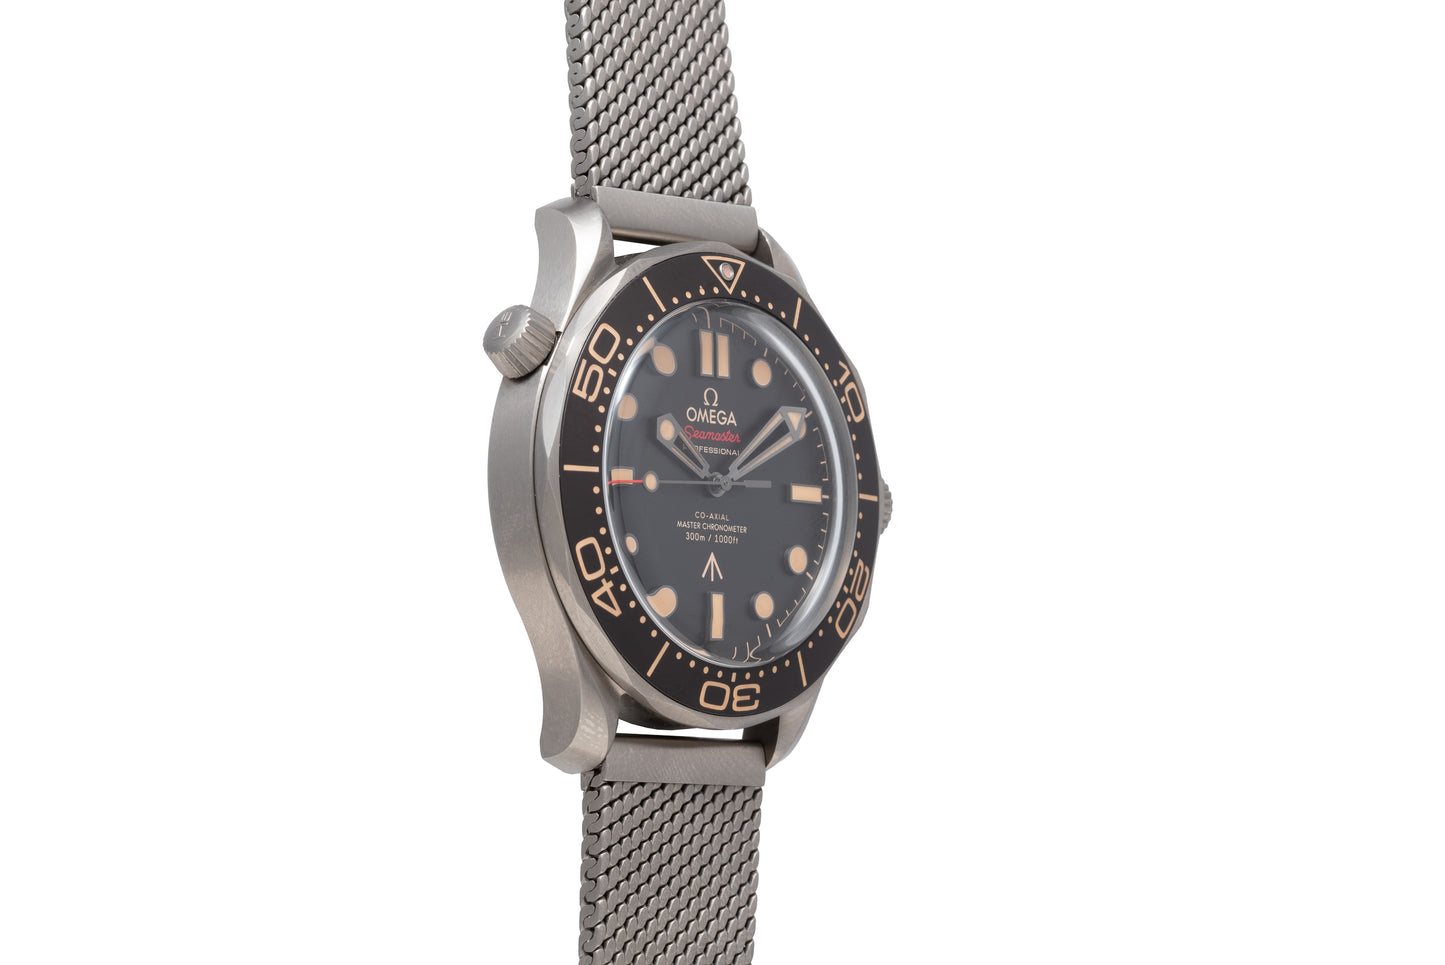 Omega Seamaster Diver 300M 007 'No Time To Die' Edition